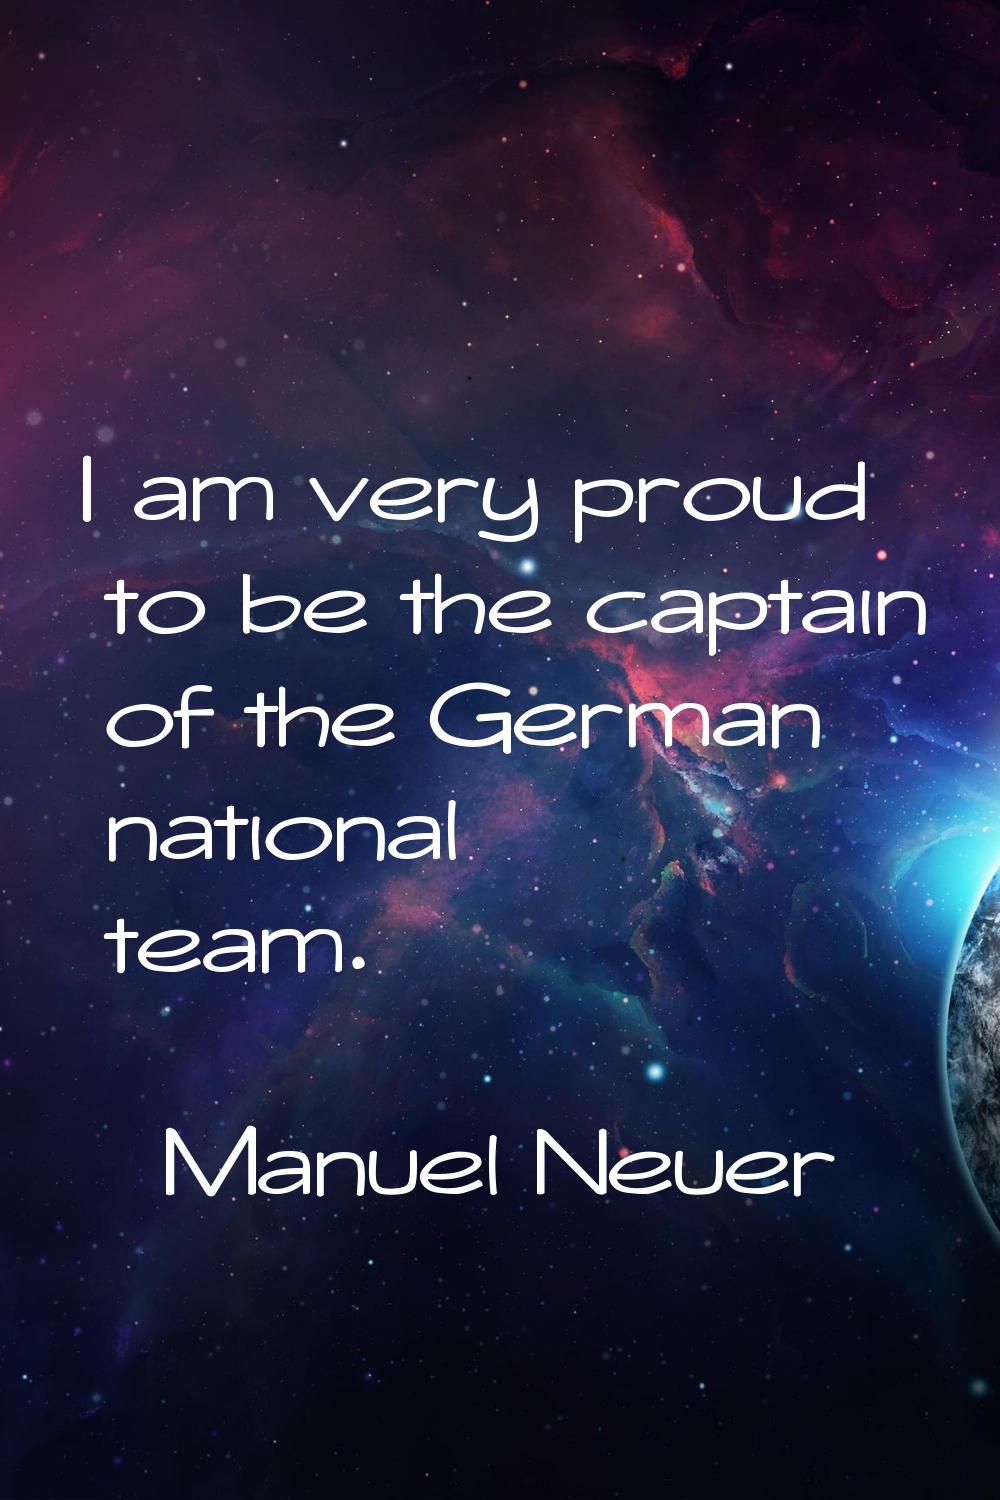 I am very proud to be the captain of the German national team.